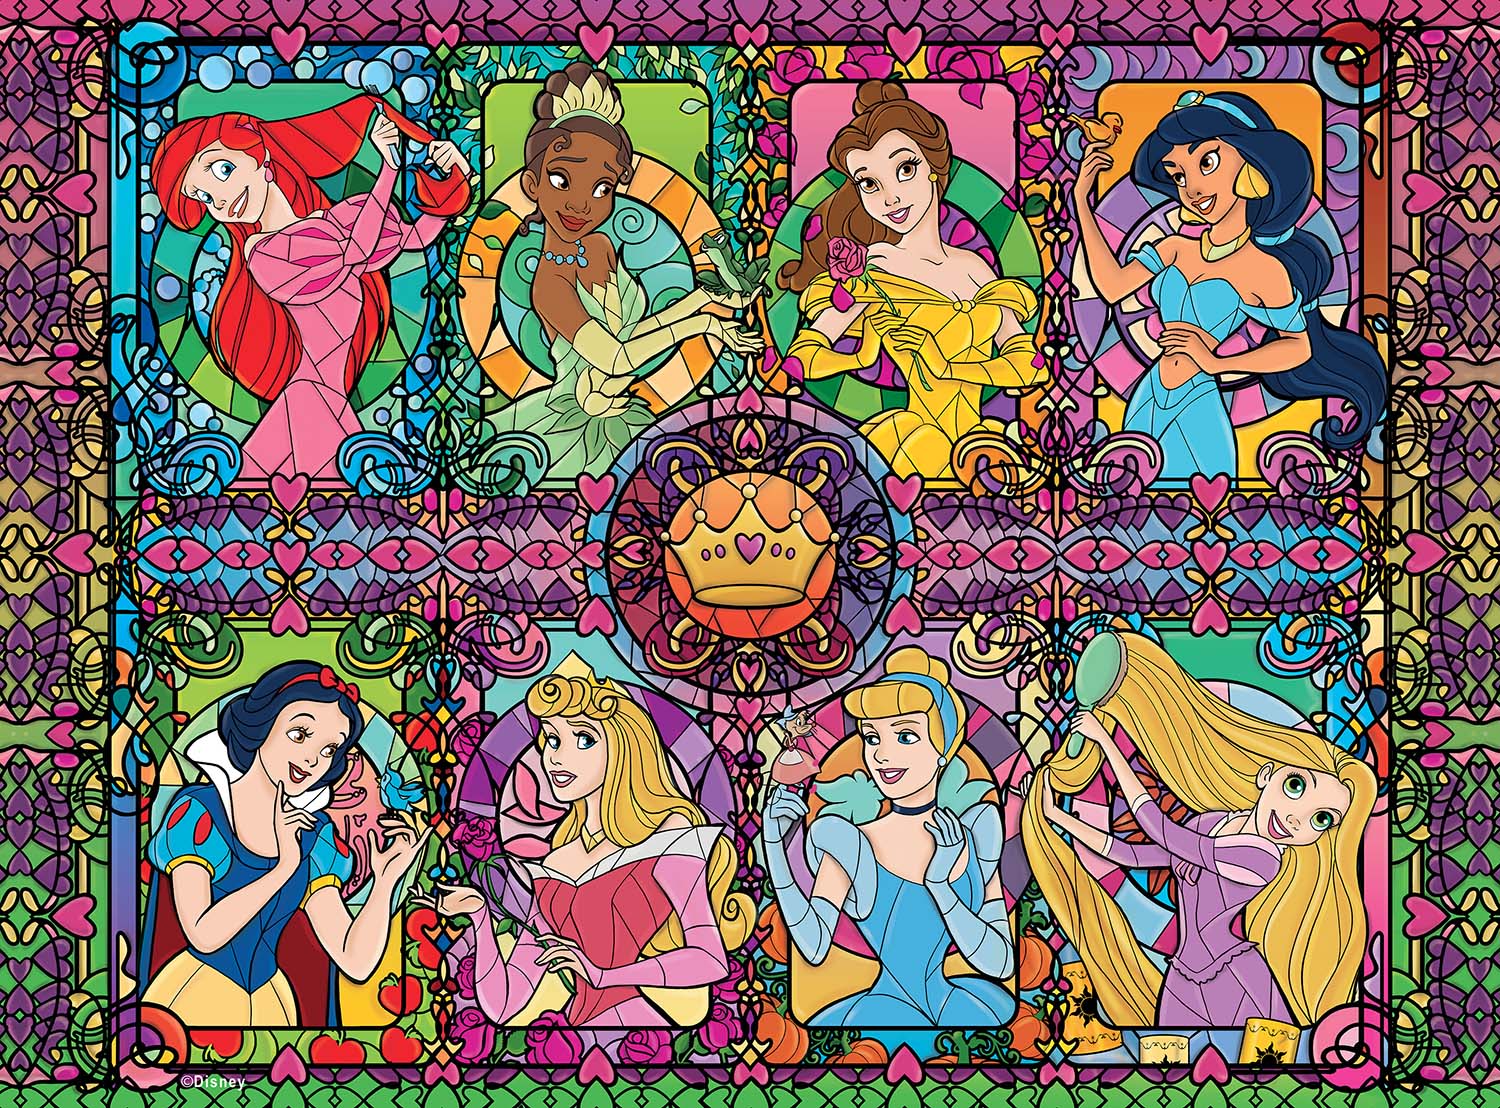 Silver: Stained Glass Princess Disney Jigsaw Puzzle